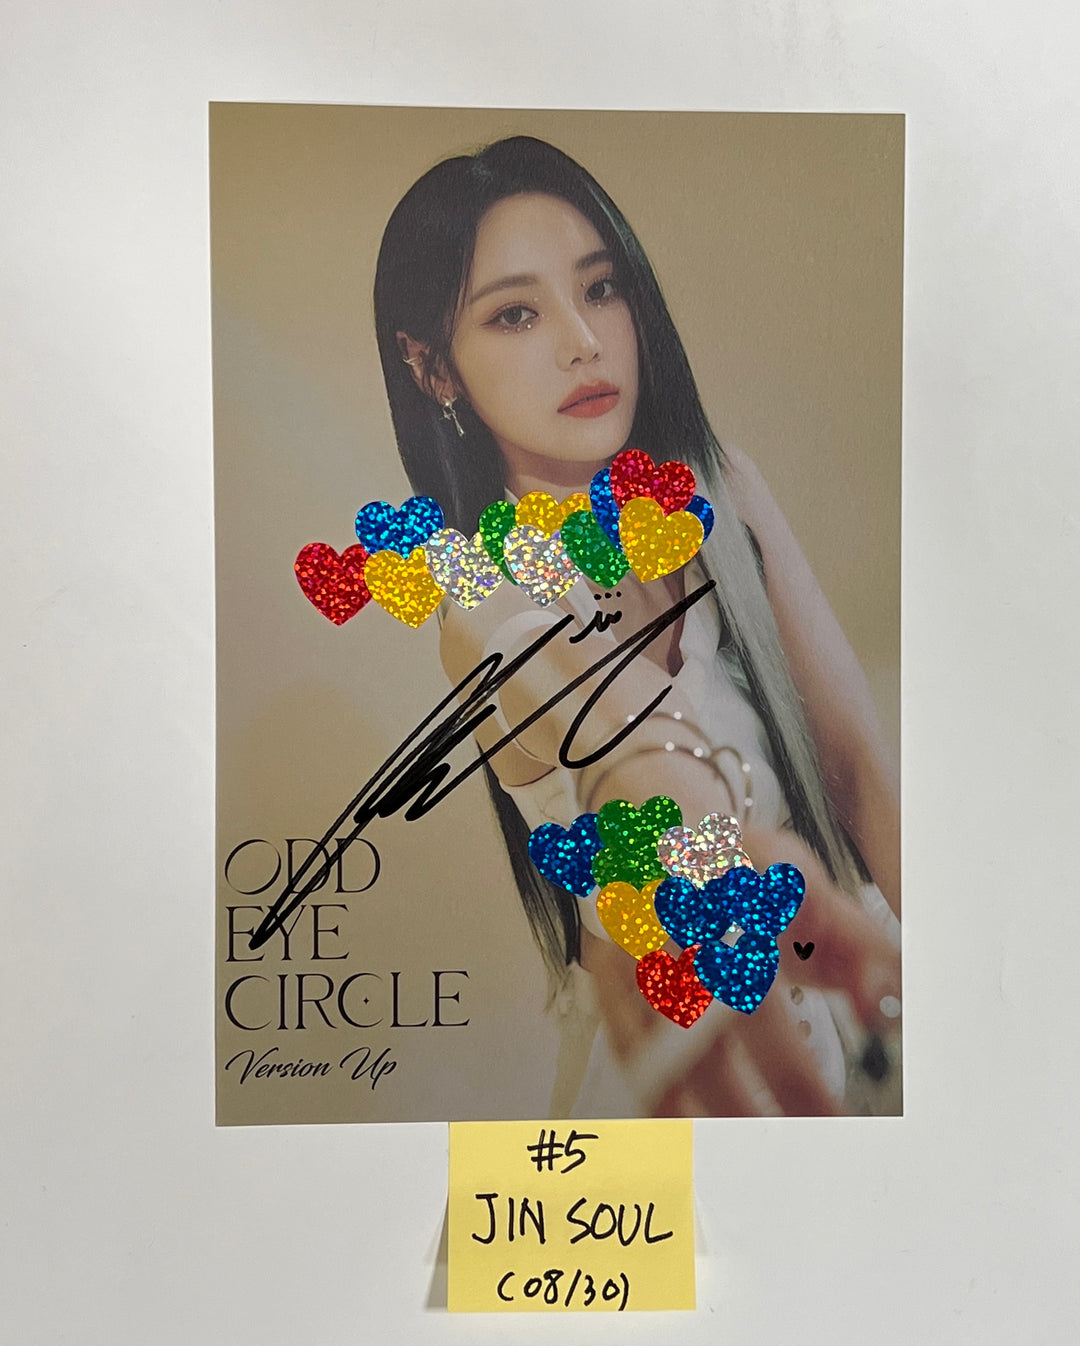 ODD EYE CIRCLE "Version Up" - A Cut Page From Fansign Event Album [23.08.30]